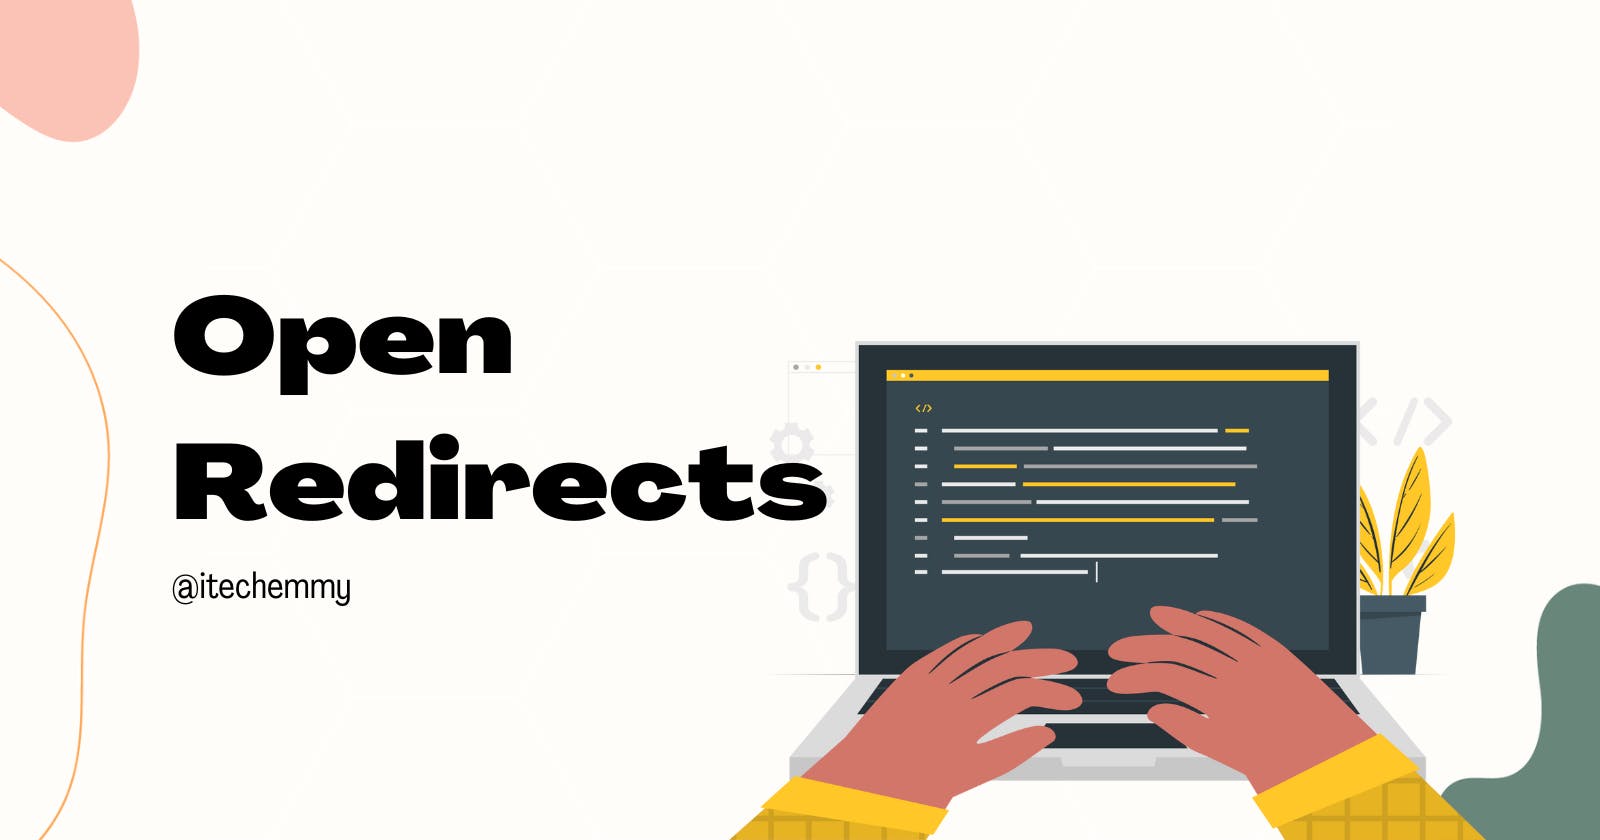 Open Redirects and why you should avoid it if possible